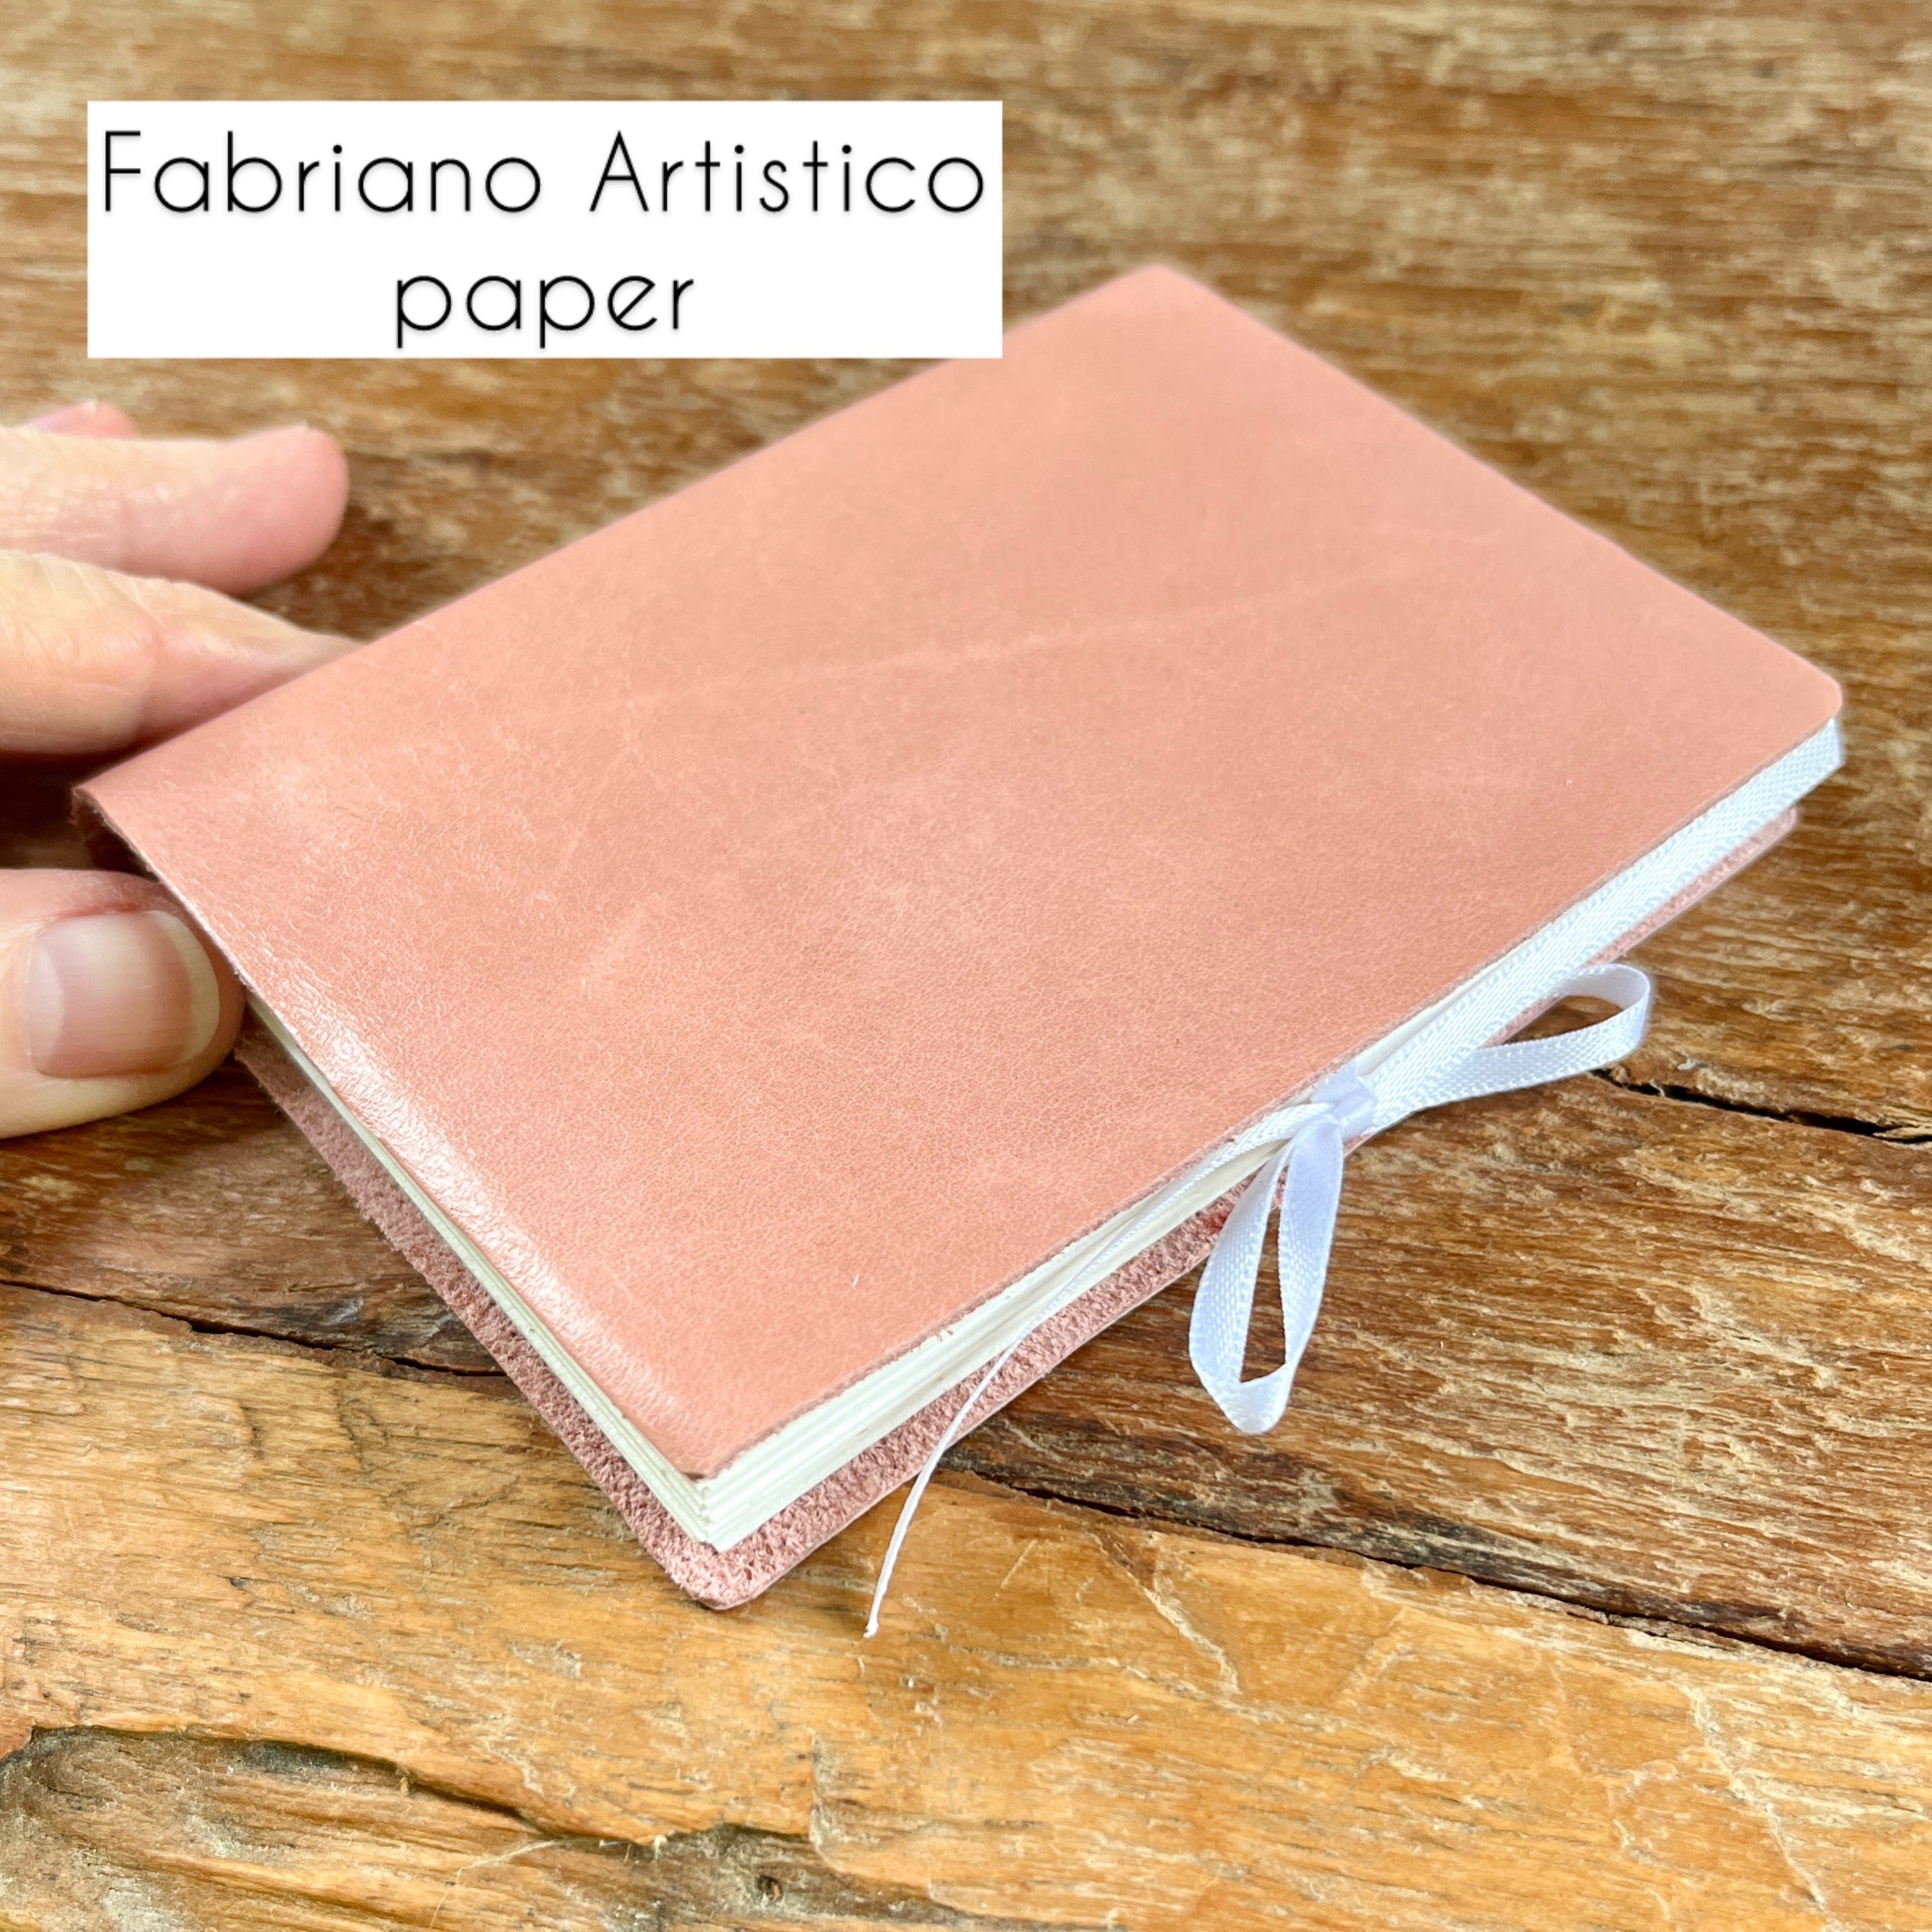 Jumbo handmade journal in genuine leather - blank pages